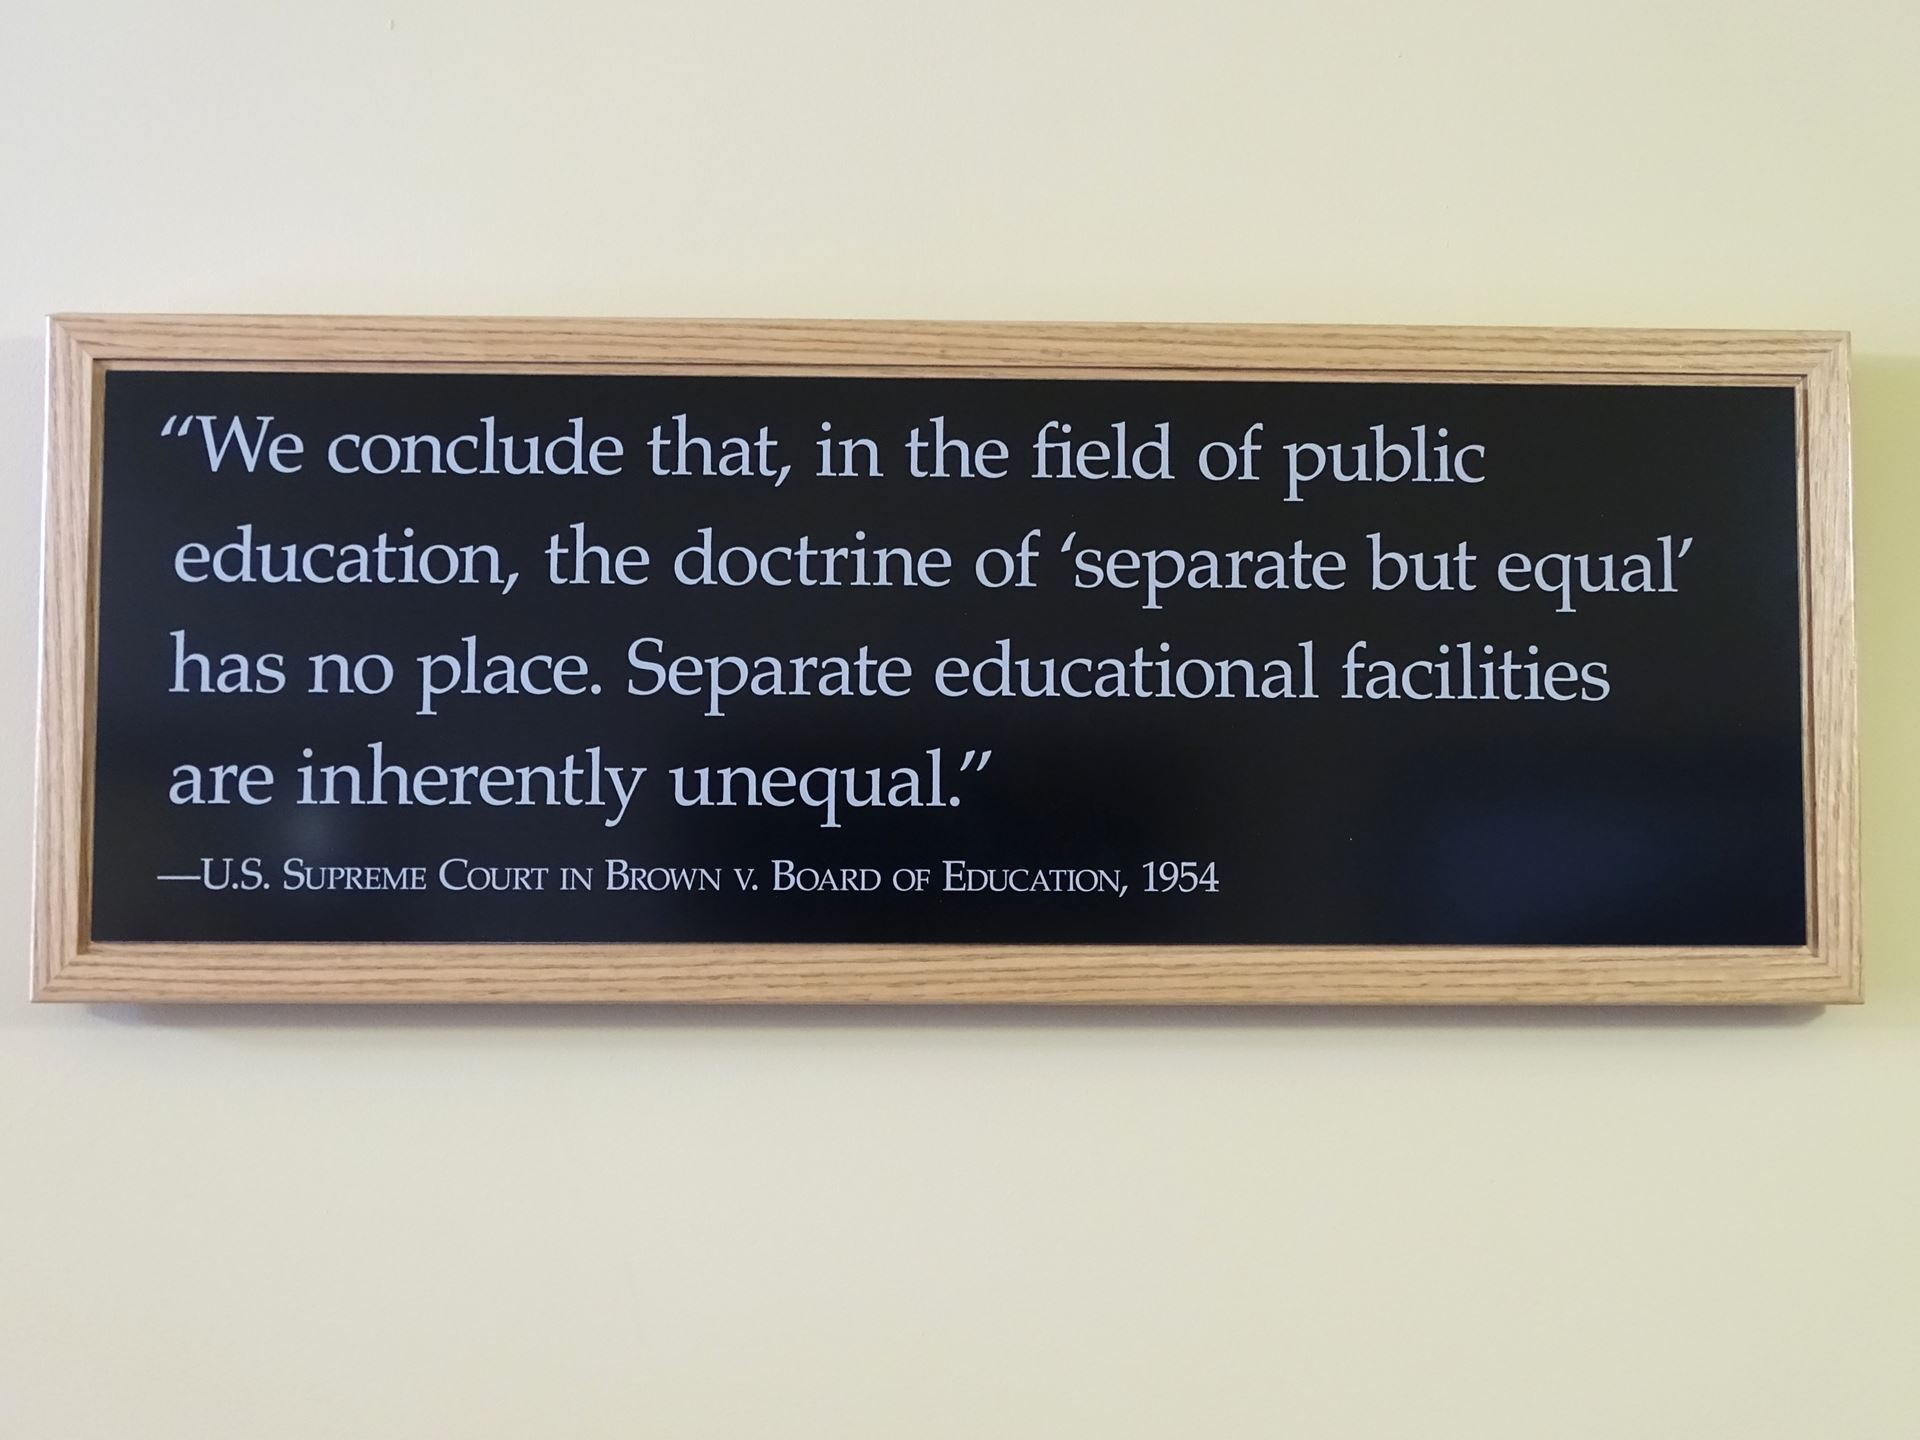 By Adam Jones from Kelowna, BC, Canada - Quote on Segregation from Supreme Court Decision - Brown v. Board of Education Historic Site - Topeka - Kansas - USA, CC BY-SA 2.0, https://commons.wikimedia.org/w/index.php?curid=72021653